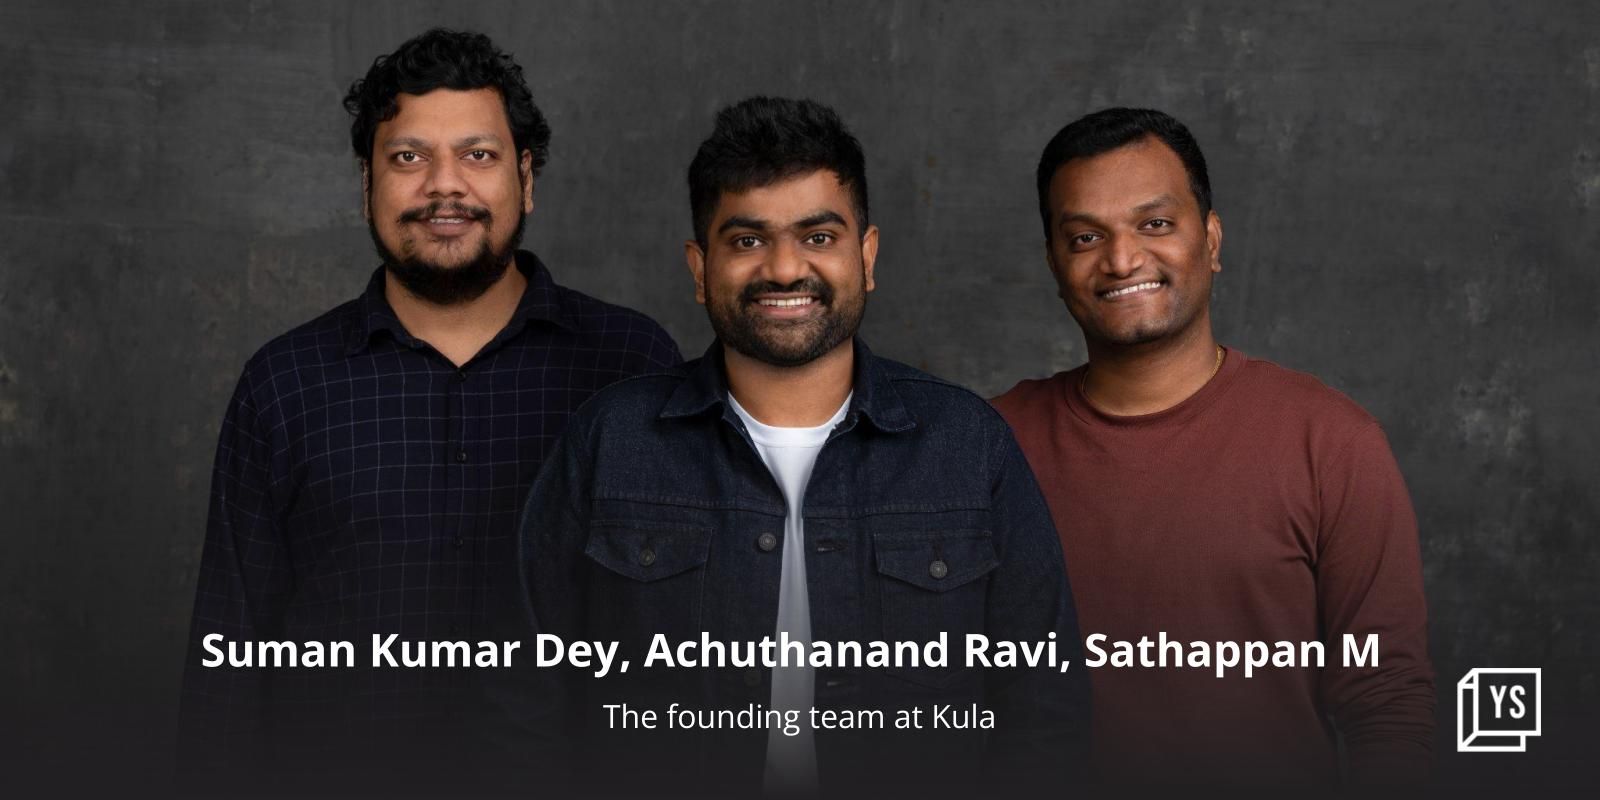 Recruiting platform Kula raises $12 million in a seed round co-led by Sequoia, Square Peg